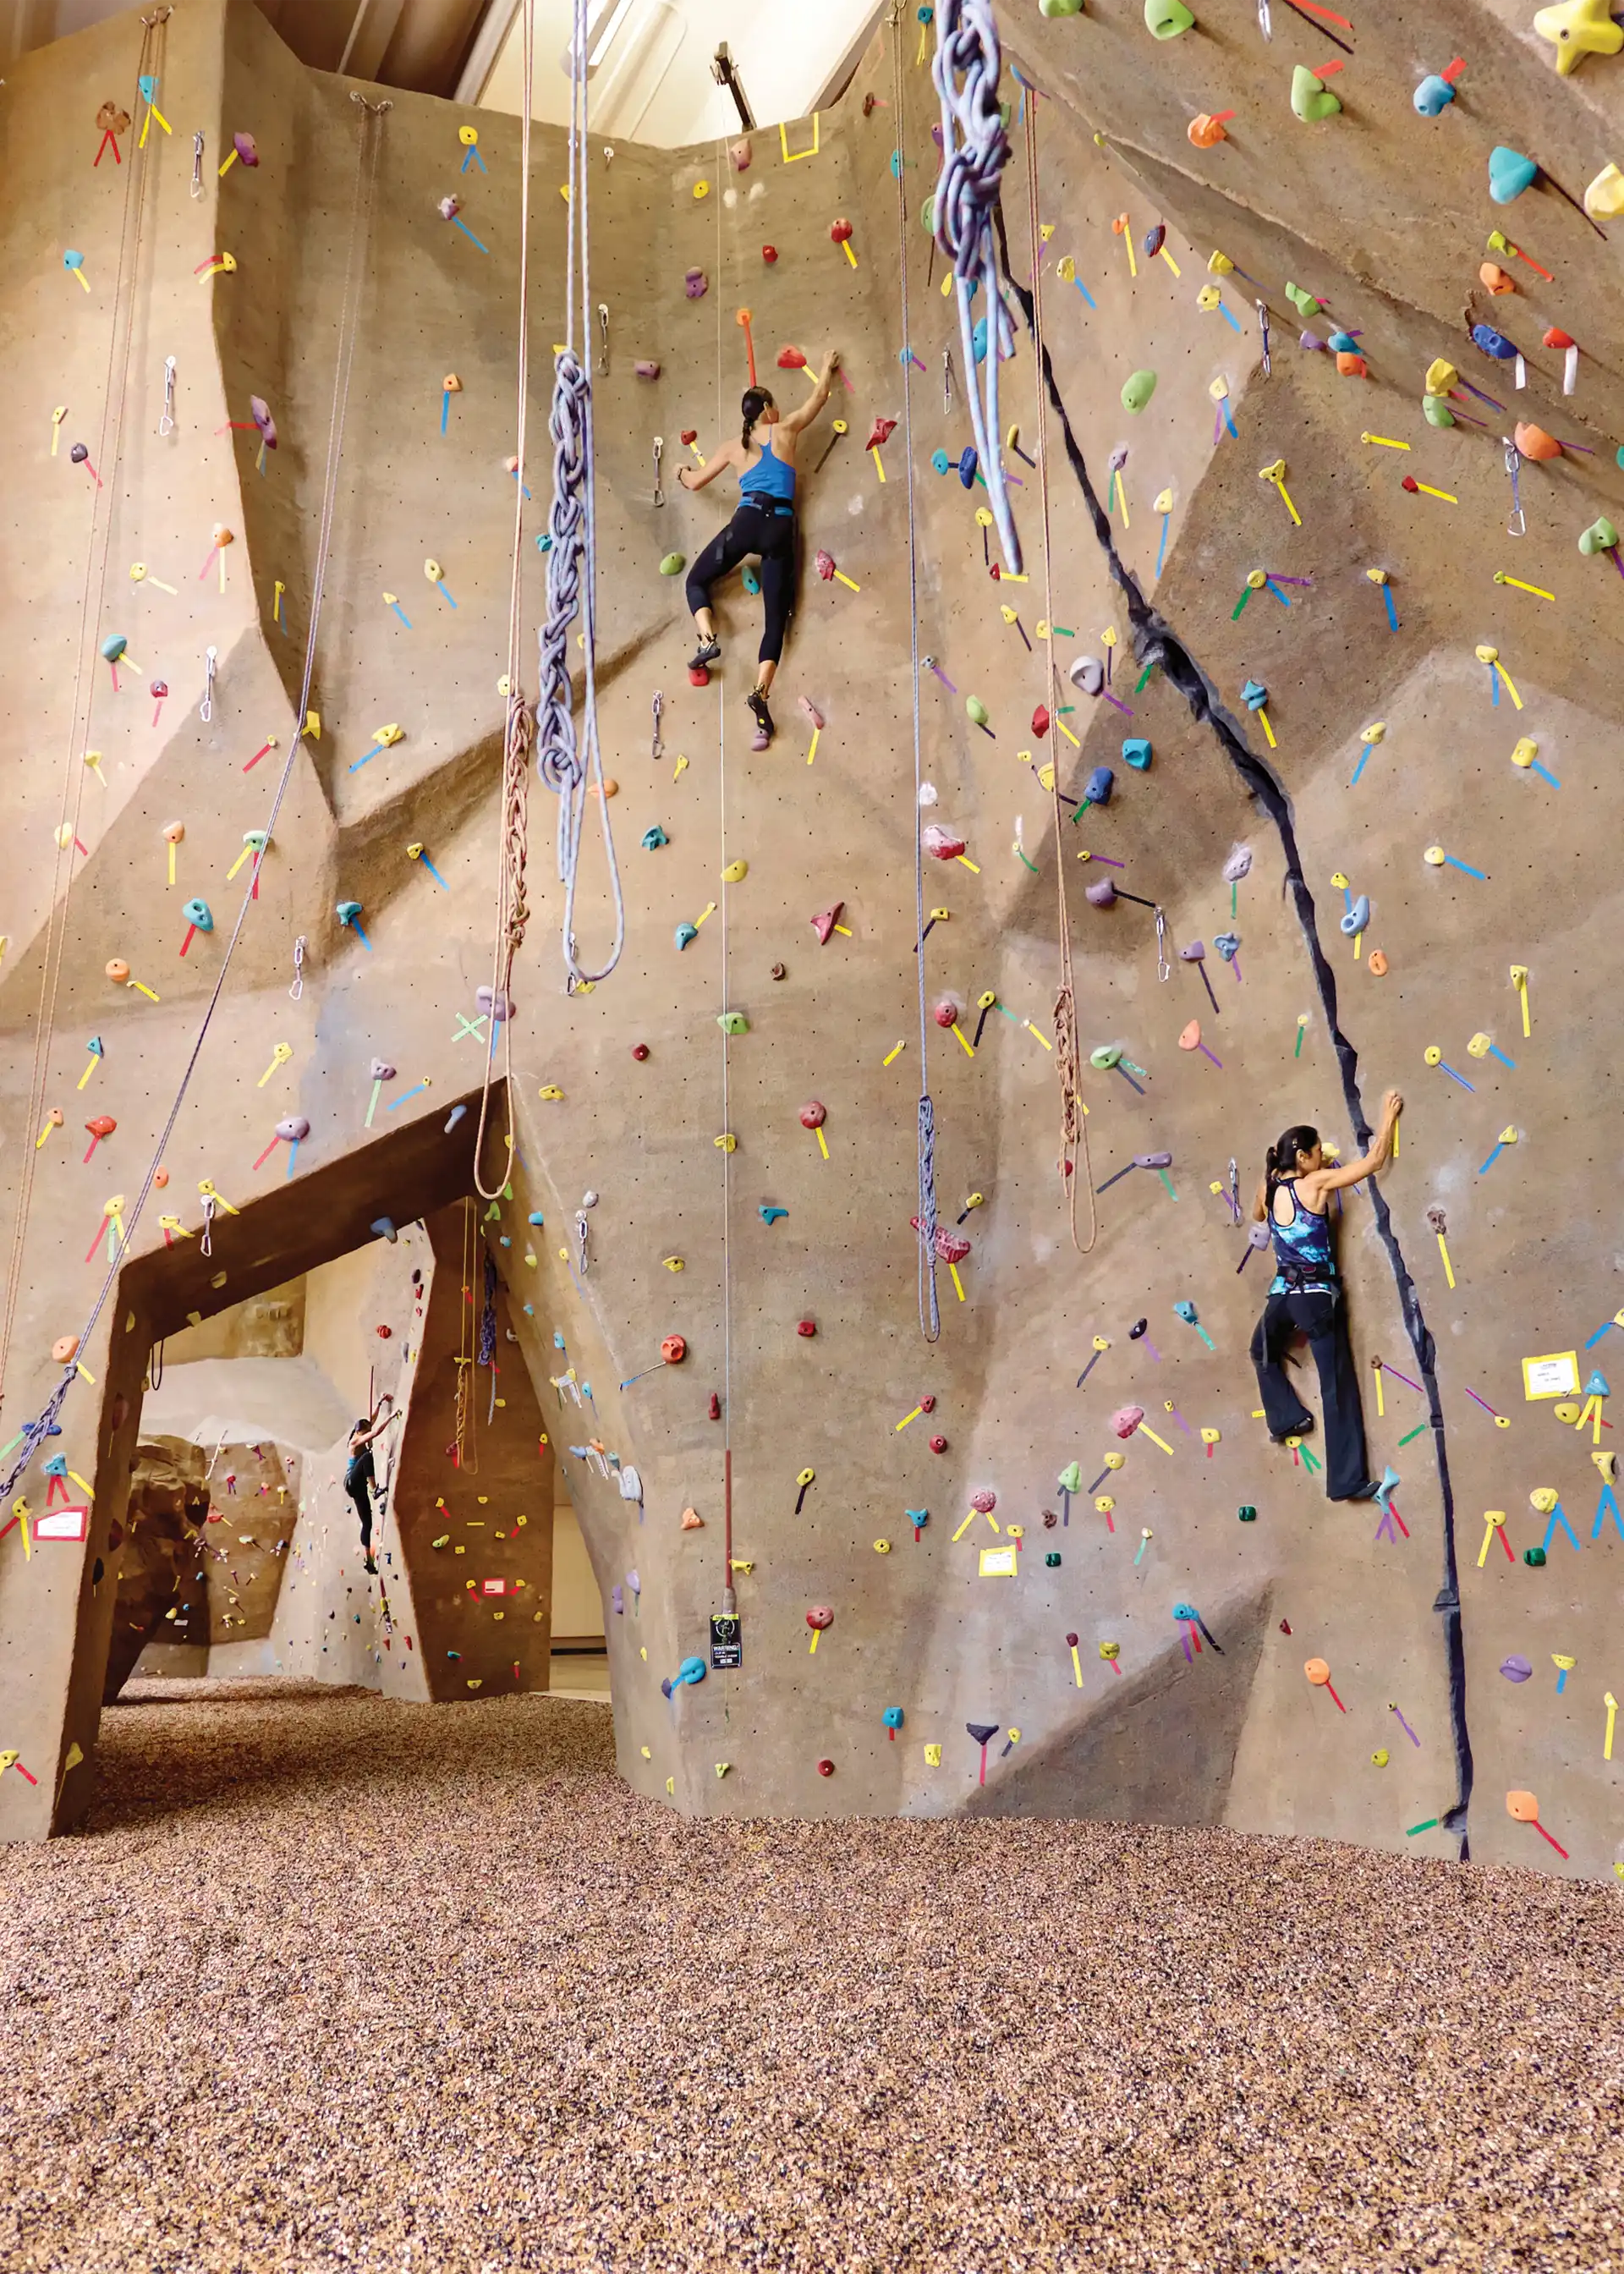 Two people in harnesses climbing on an indoor rock wall.